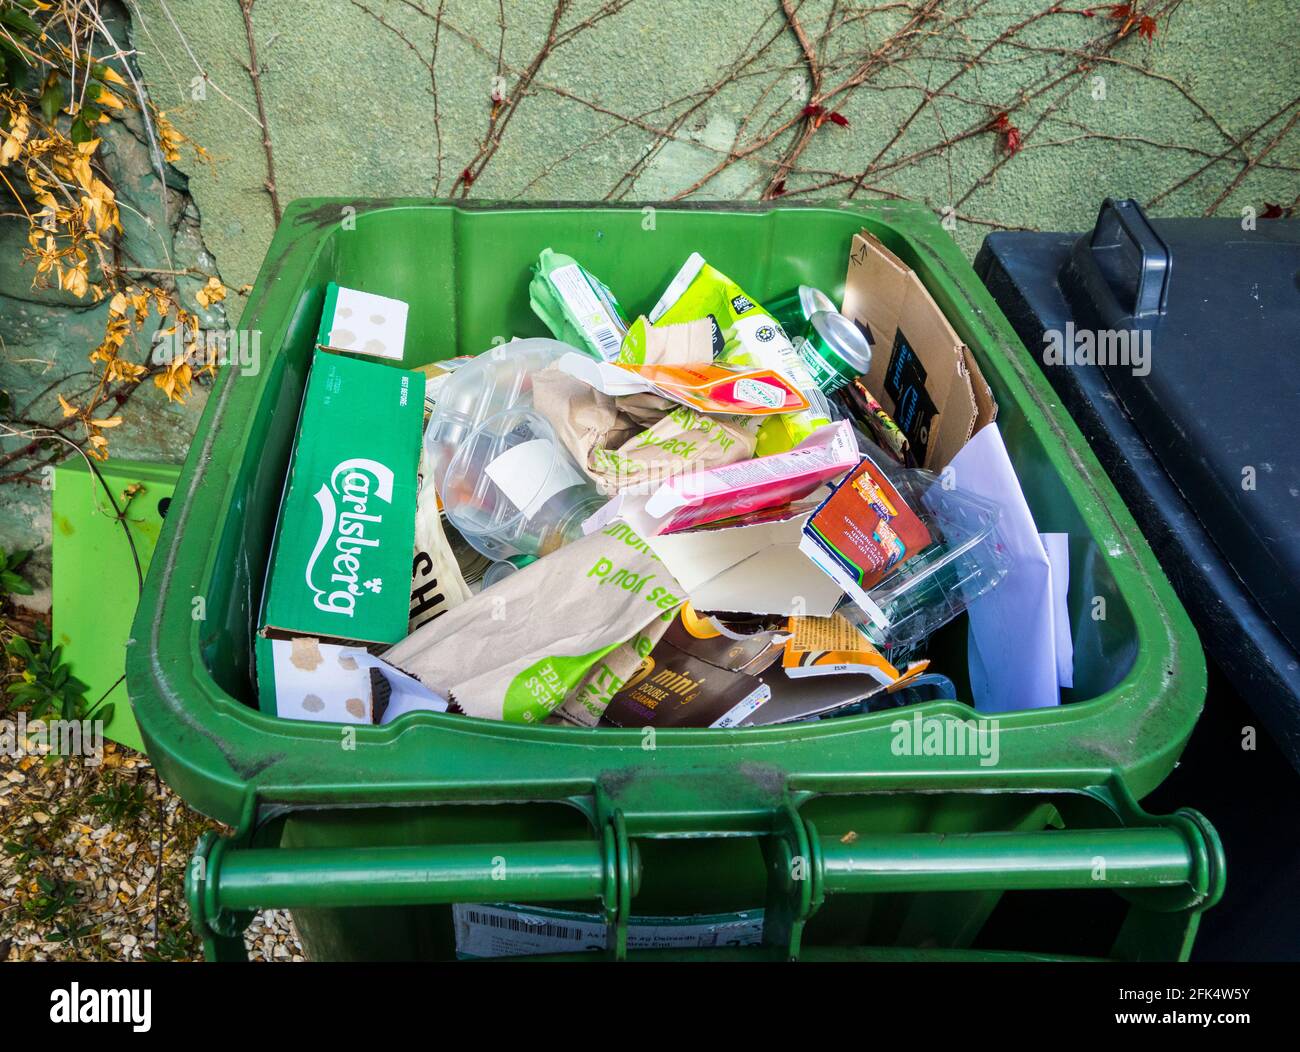 Recycling bin containing paper, cardboard, hard plastic and cans Stock Photo